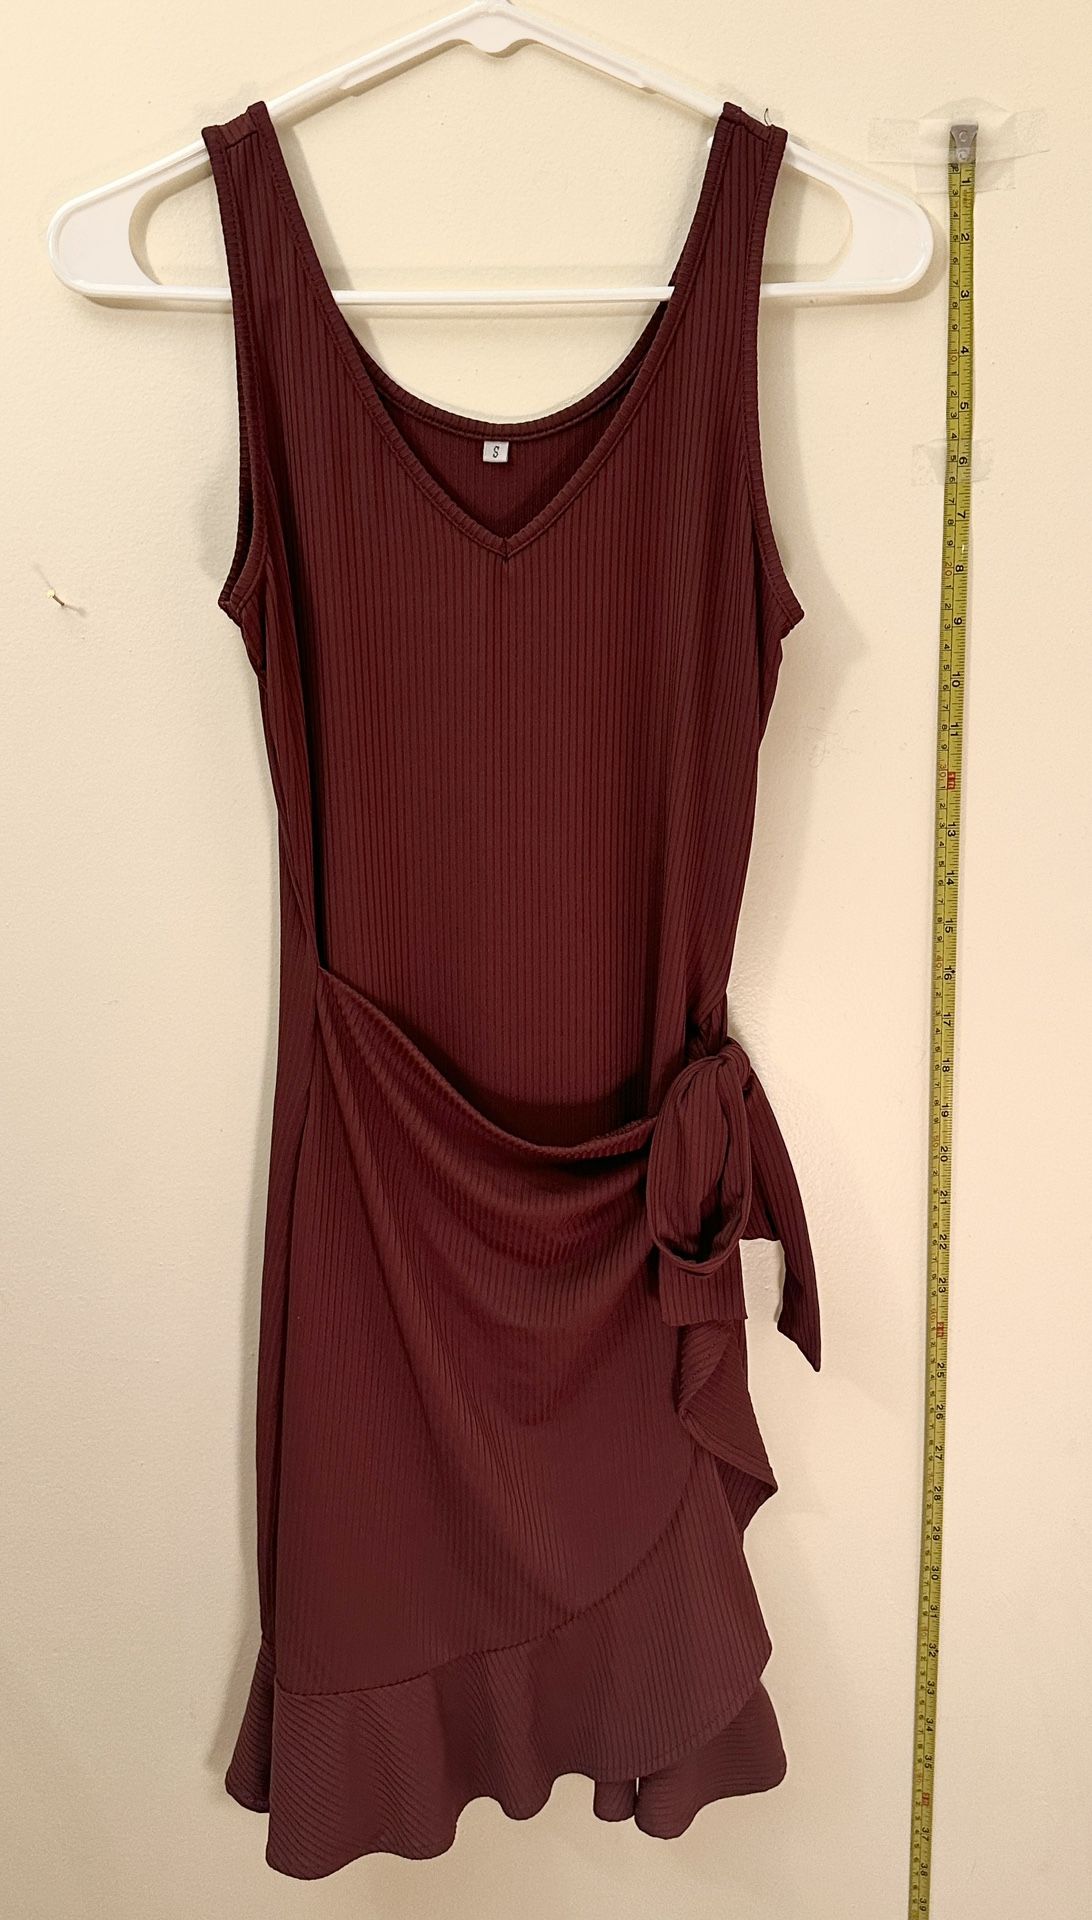 Burgundy Front Tie Wrap Dress - New With Tags - Size Small